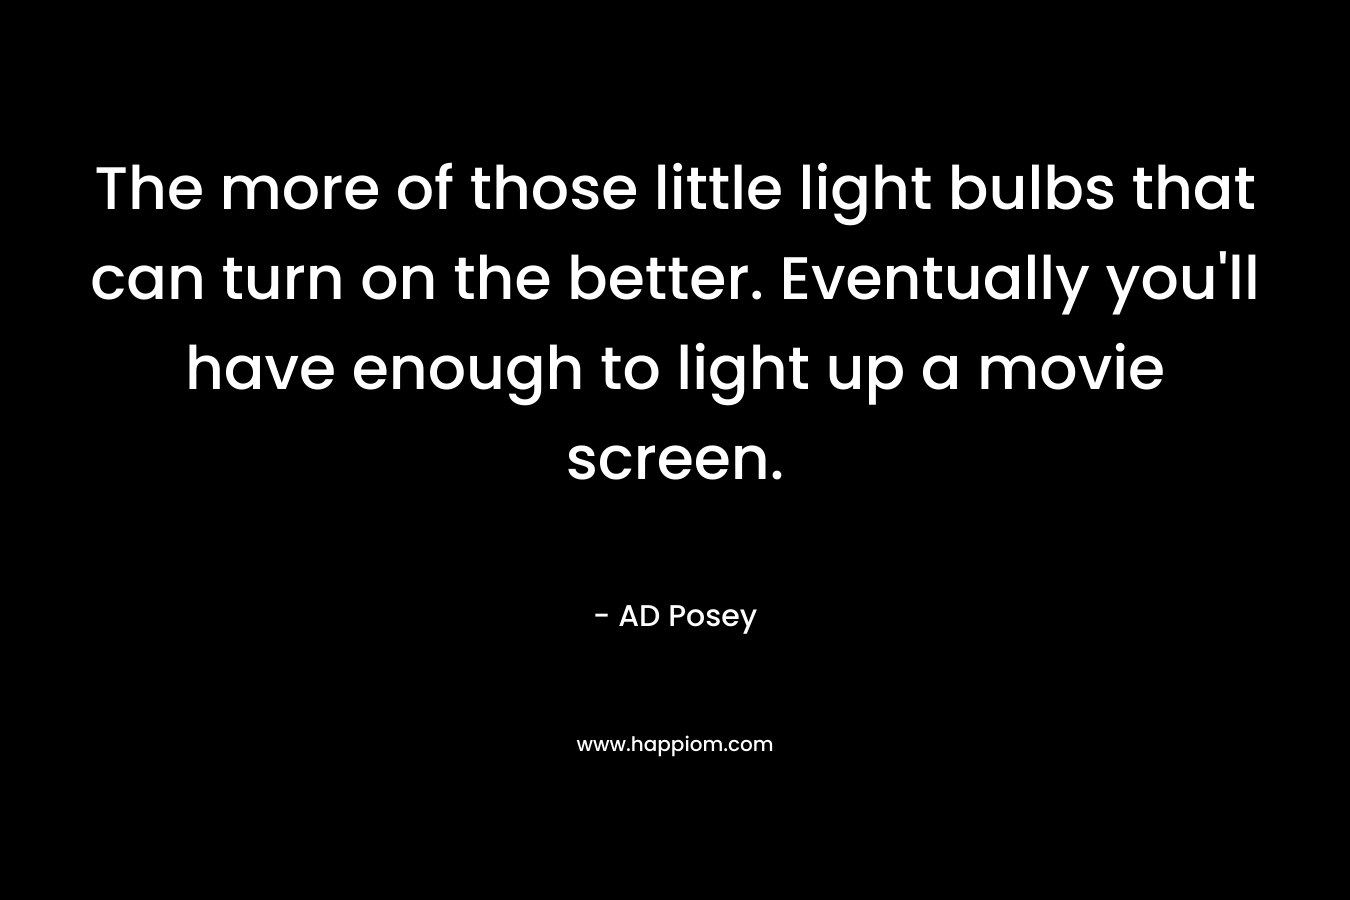 The more of those little light bulbs that can turn on the better. Eventually you'll have enough to light up a movie screen.